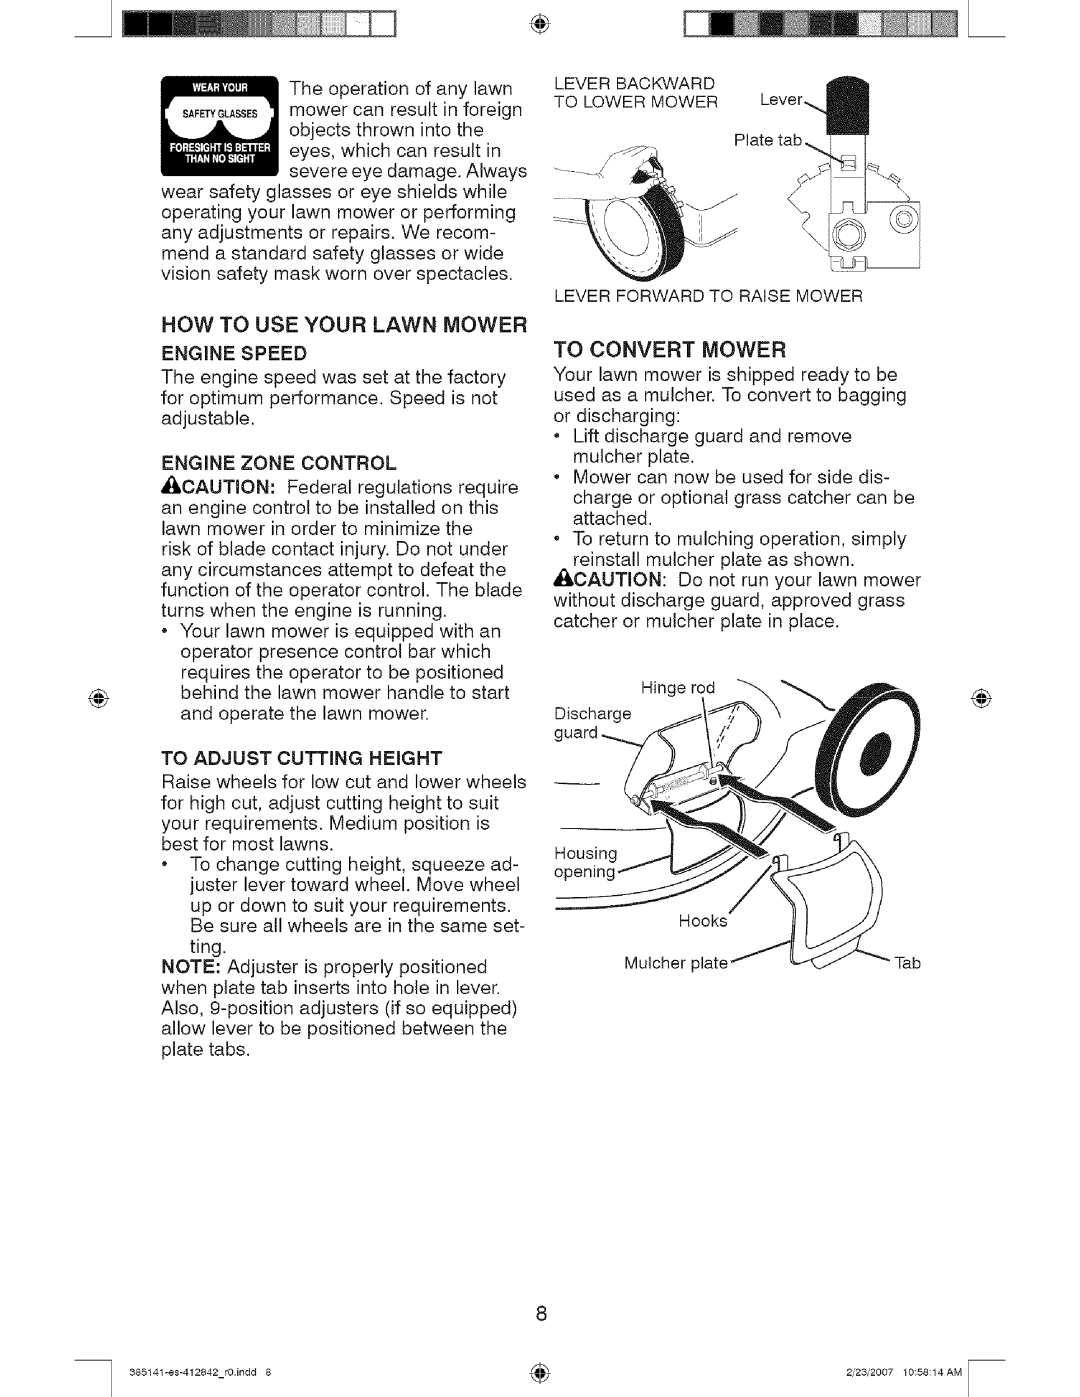 Craftsman 385, 141 owner manual How To Use Your Lawn Mower, To Convert Mower 